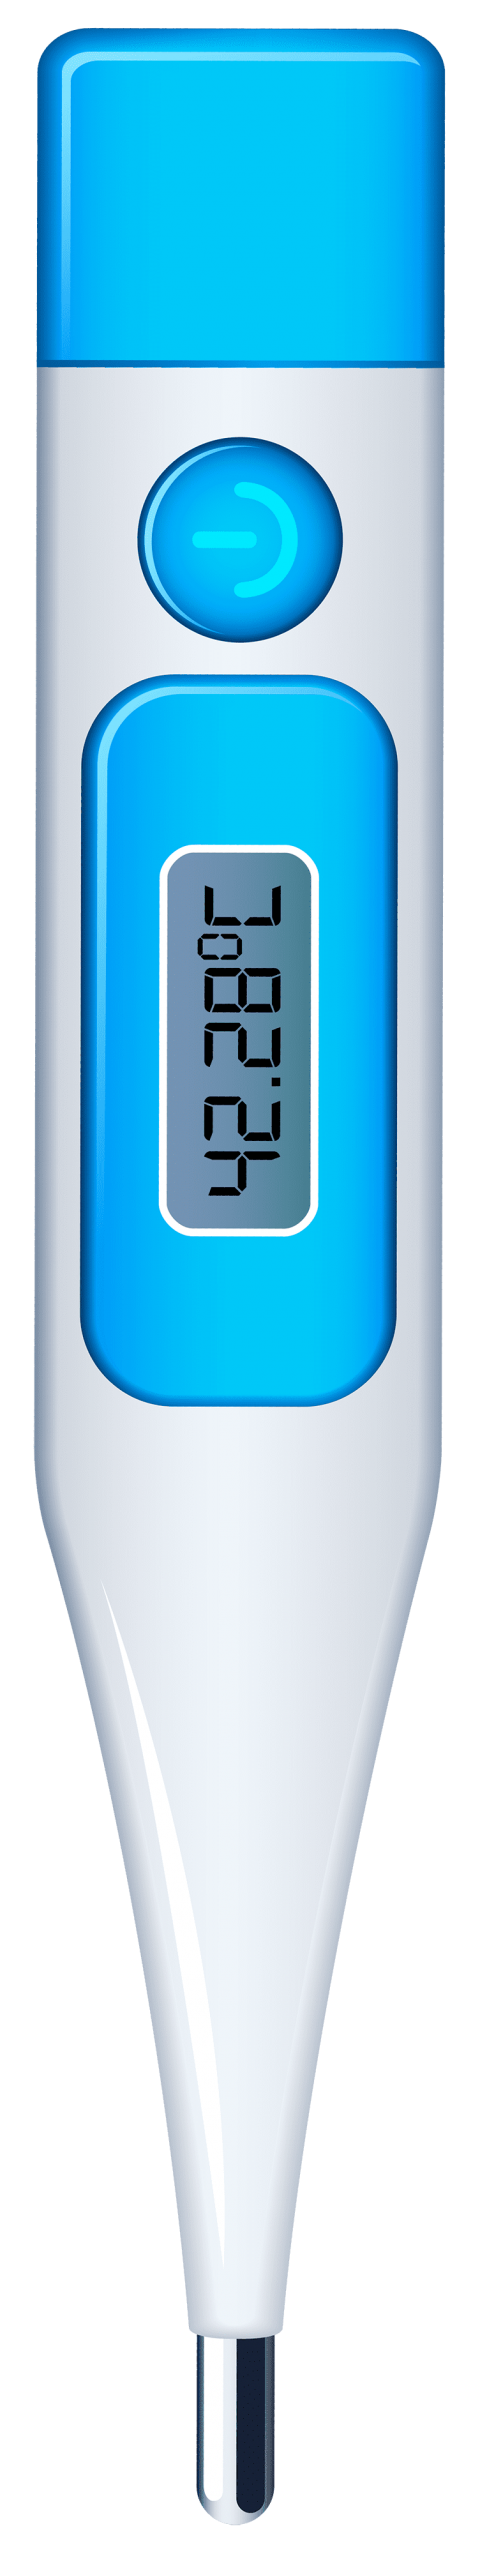 green clipart thermometer